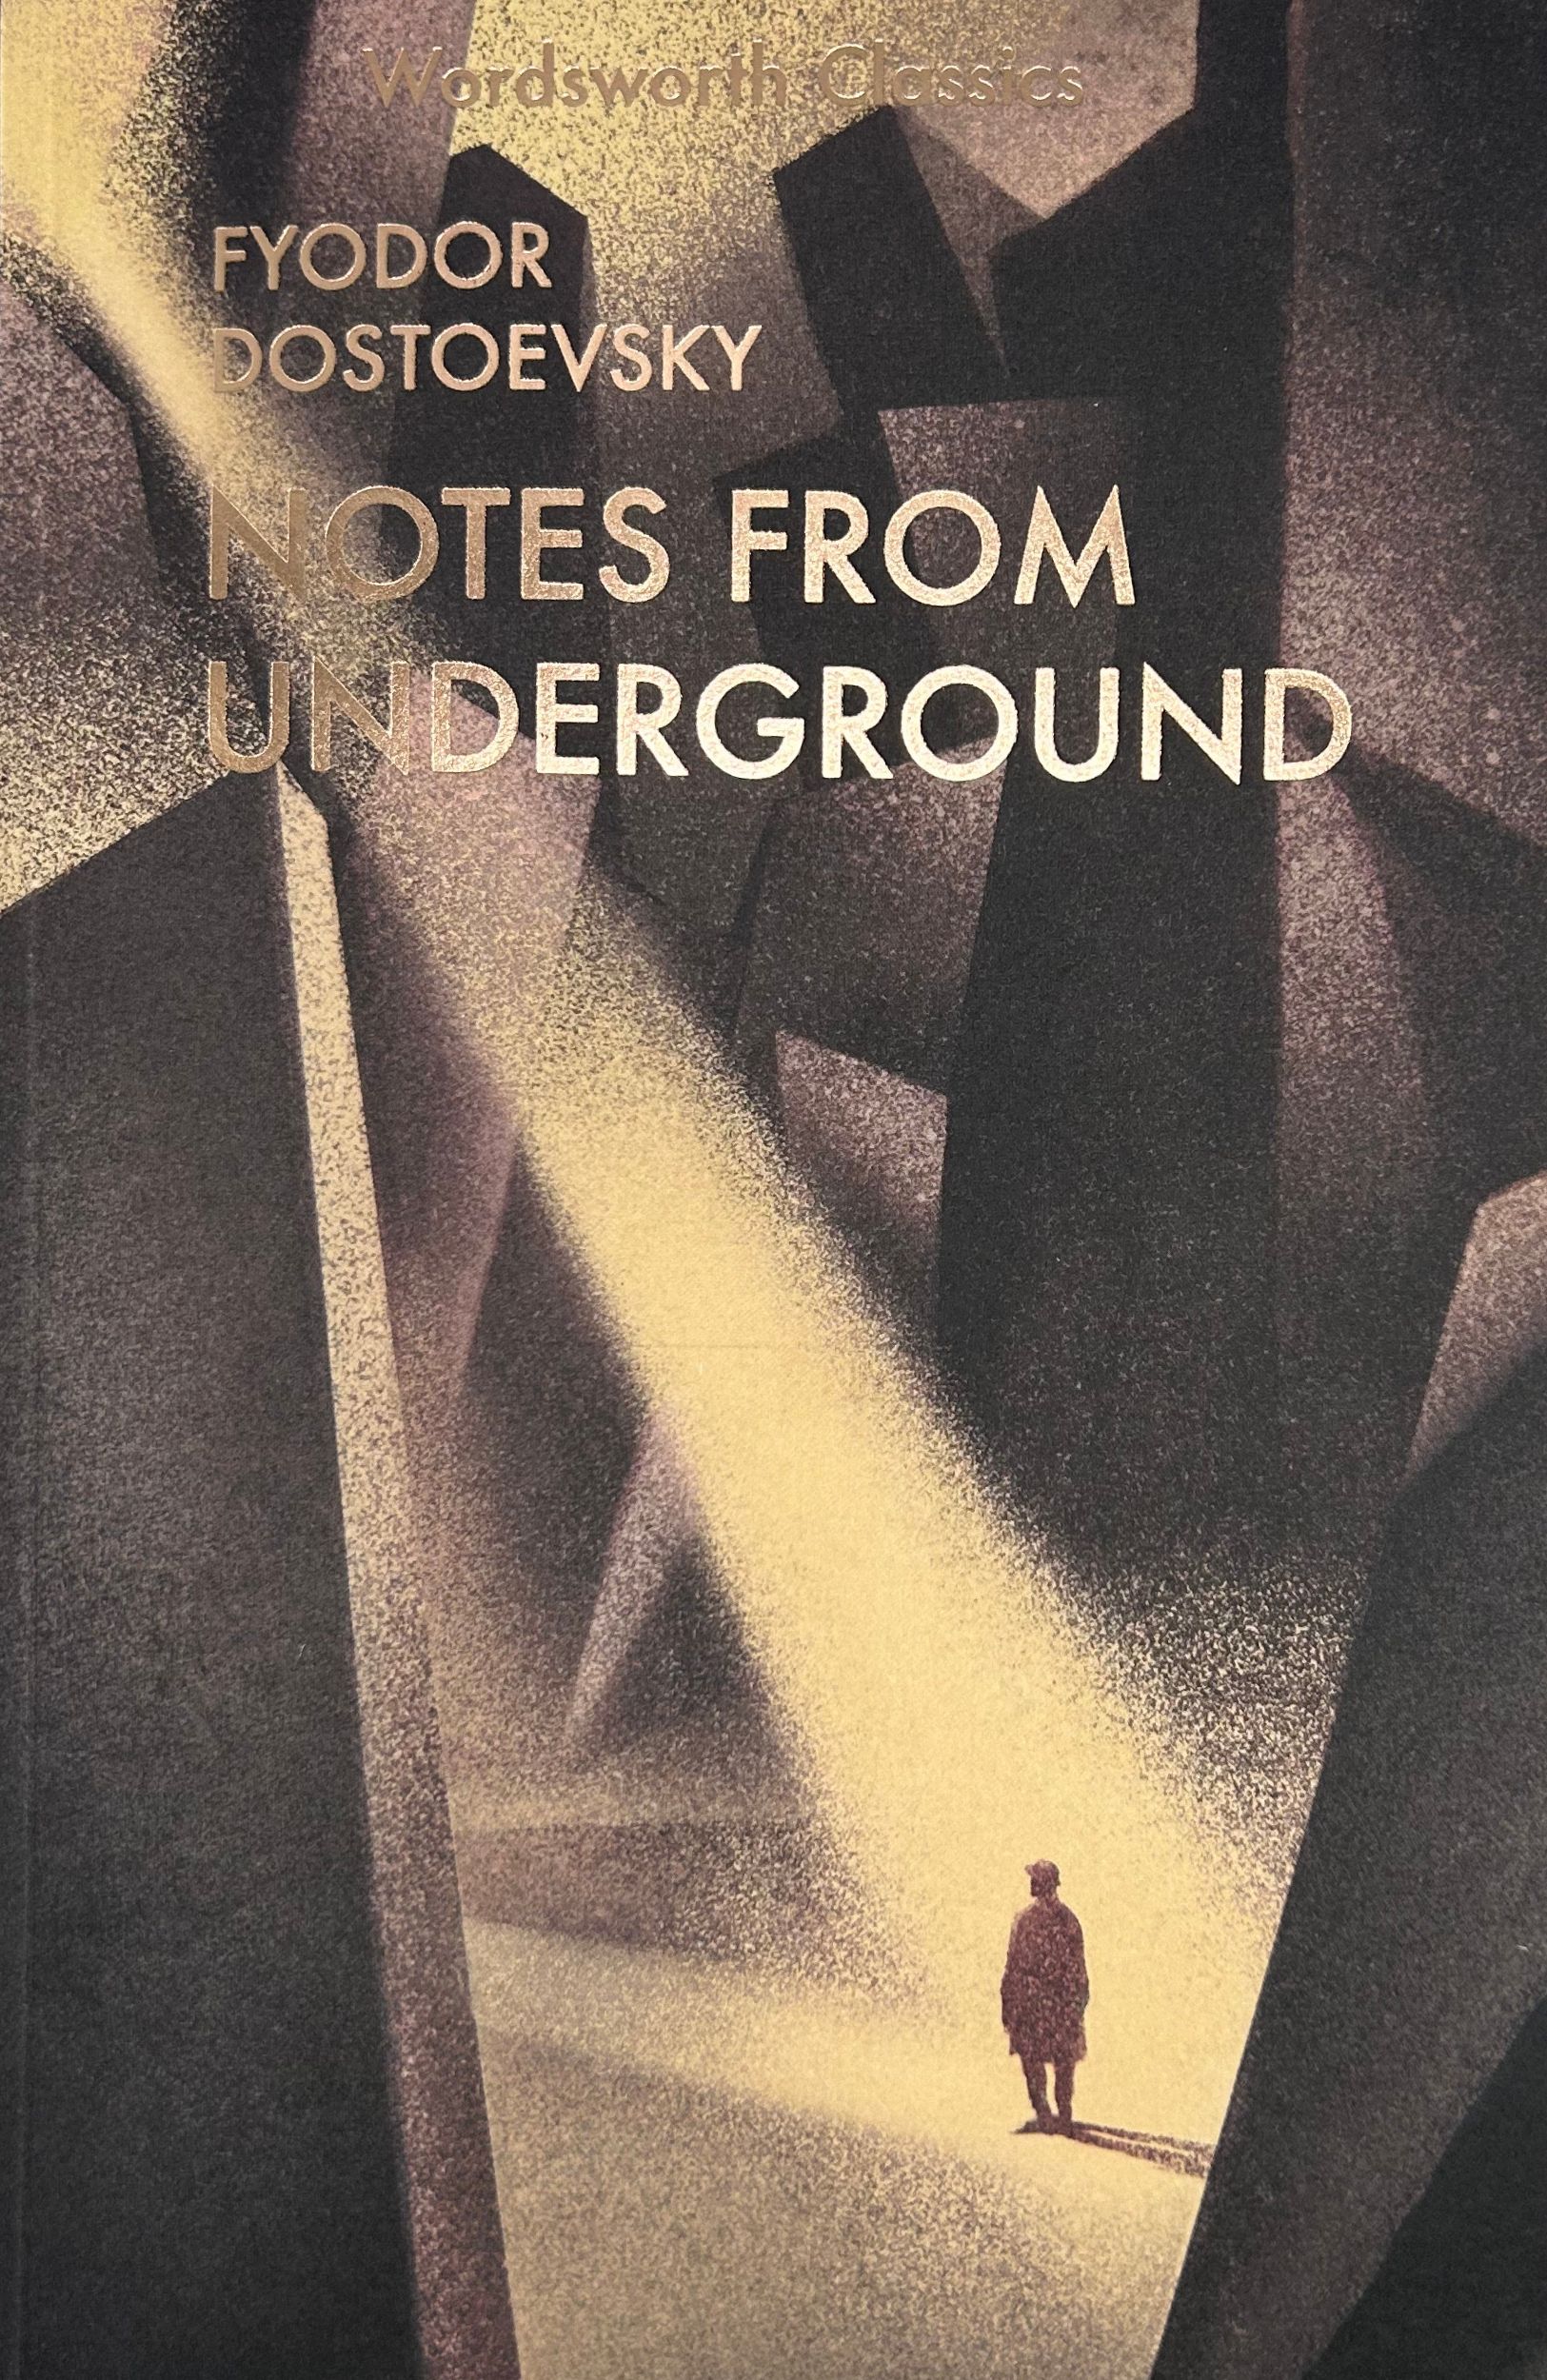 Fyodor Dostoevsky, Keith Carabine, Constance Garnett: Notes from Underground and Other Stories (Wordsworth Classics) (Paperback, 2015, Wordsworth Editions, Limited)